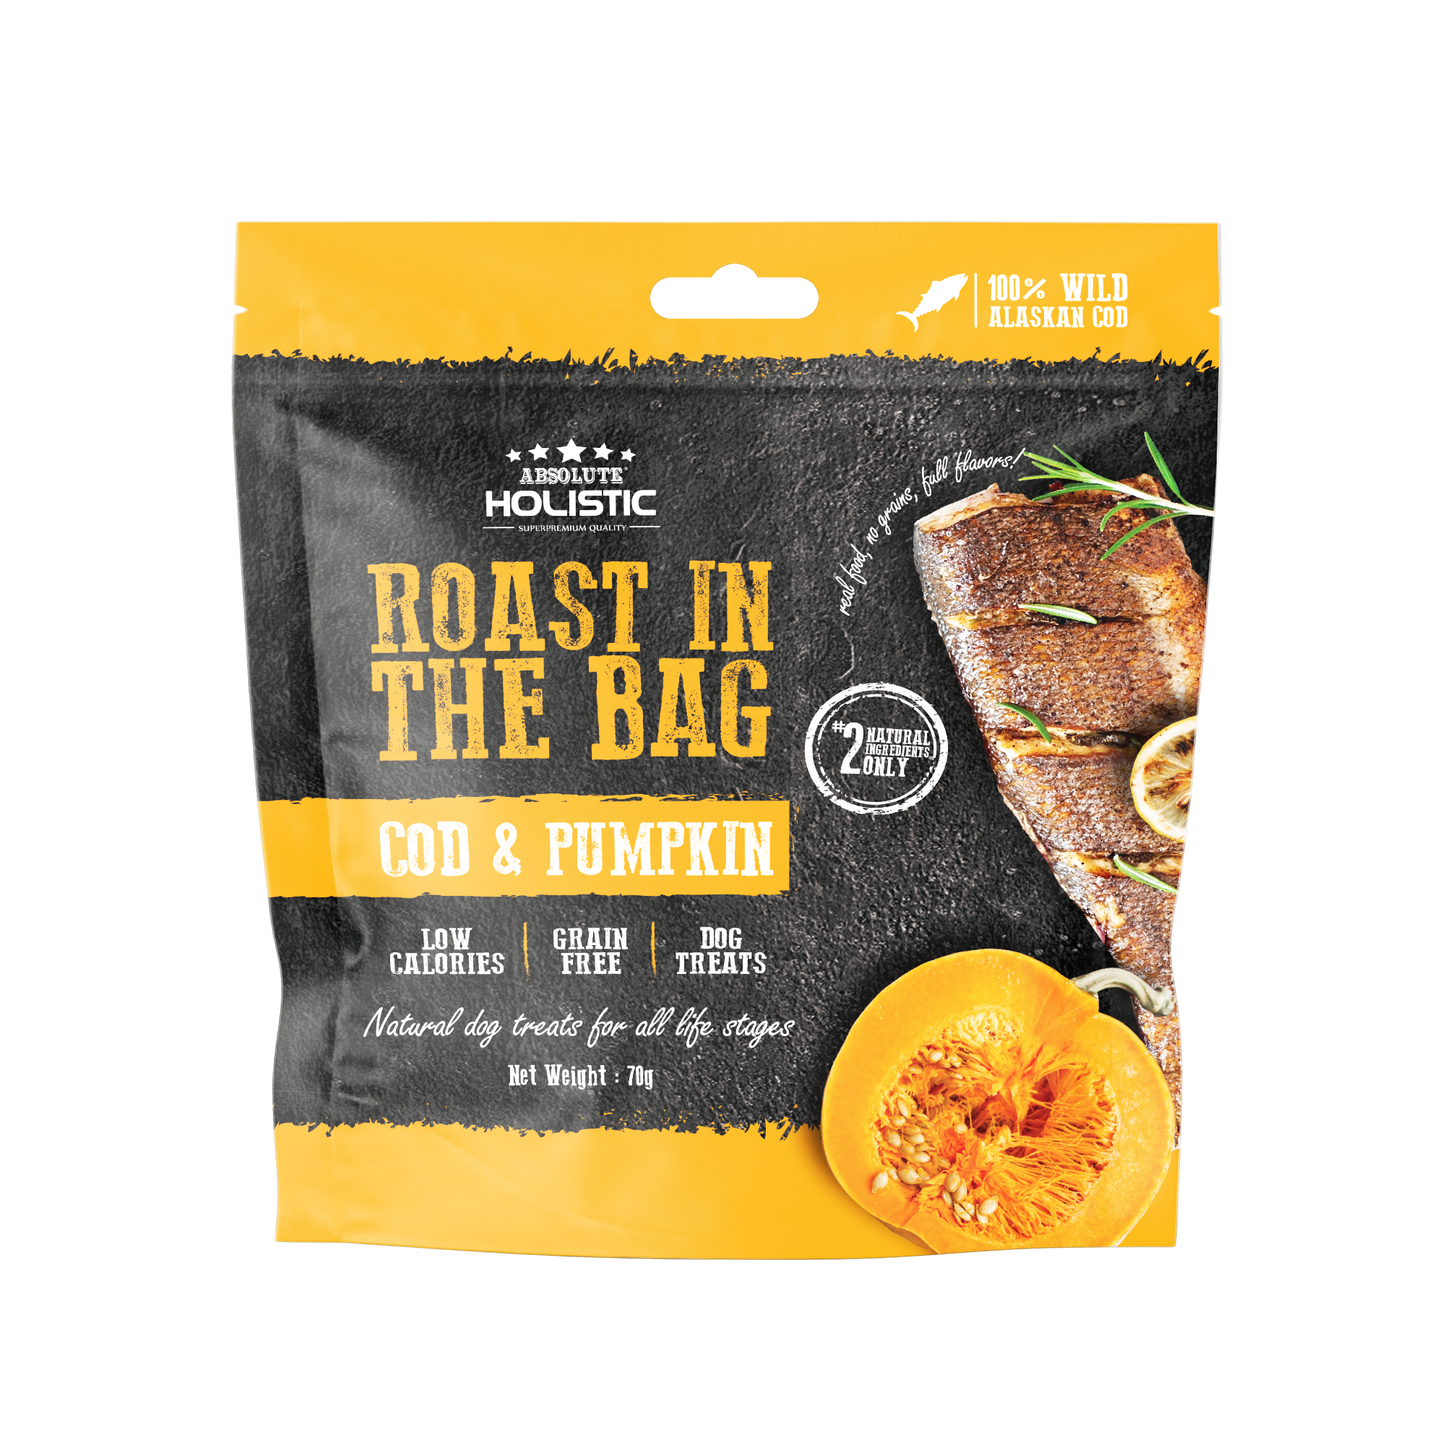 Absolute Holistic Roast In The Bag Cod & Pumpkin Natural Dog Treats (2 Sizes)